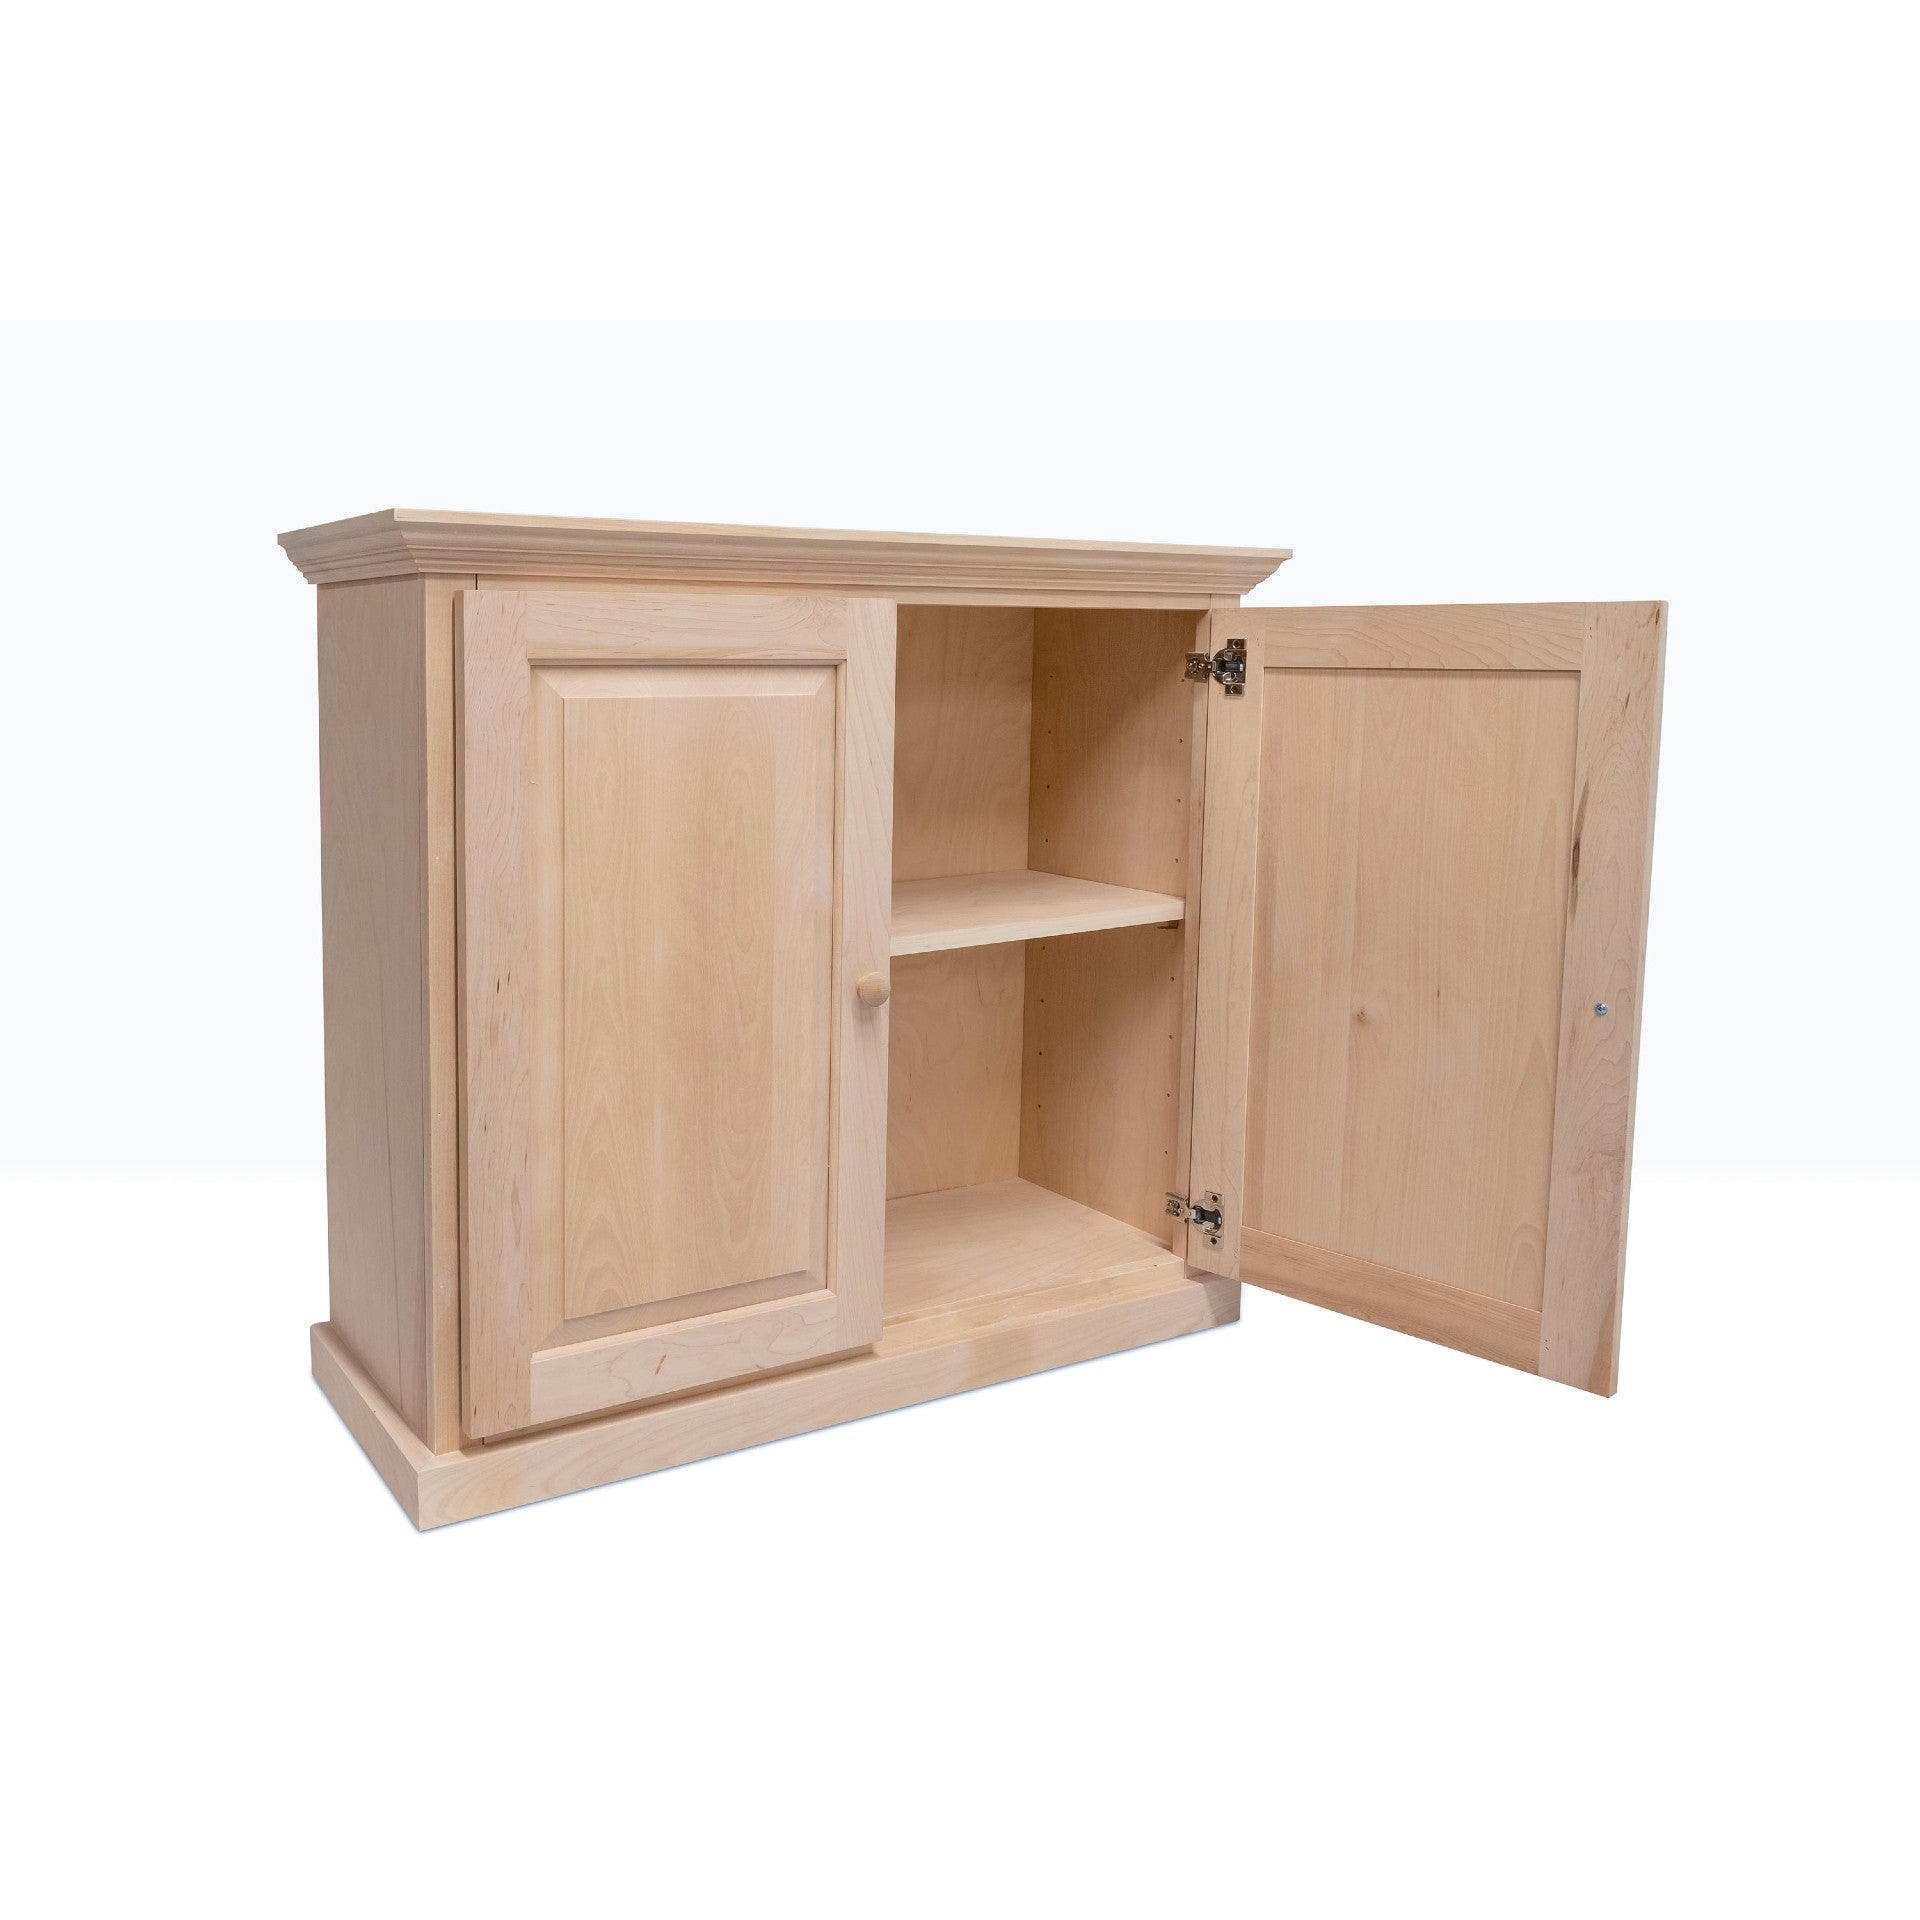 Berkshire Dover Cabinet built from unfinished birch, shown open to highlight adjustable shelving.